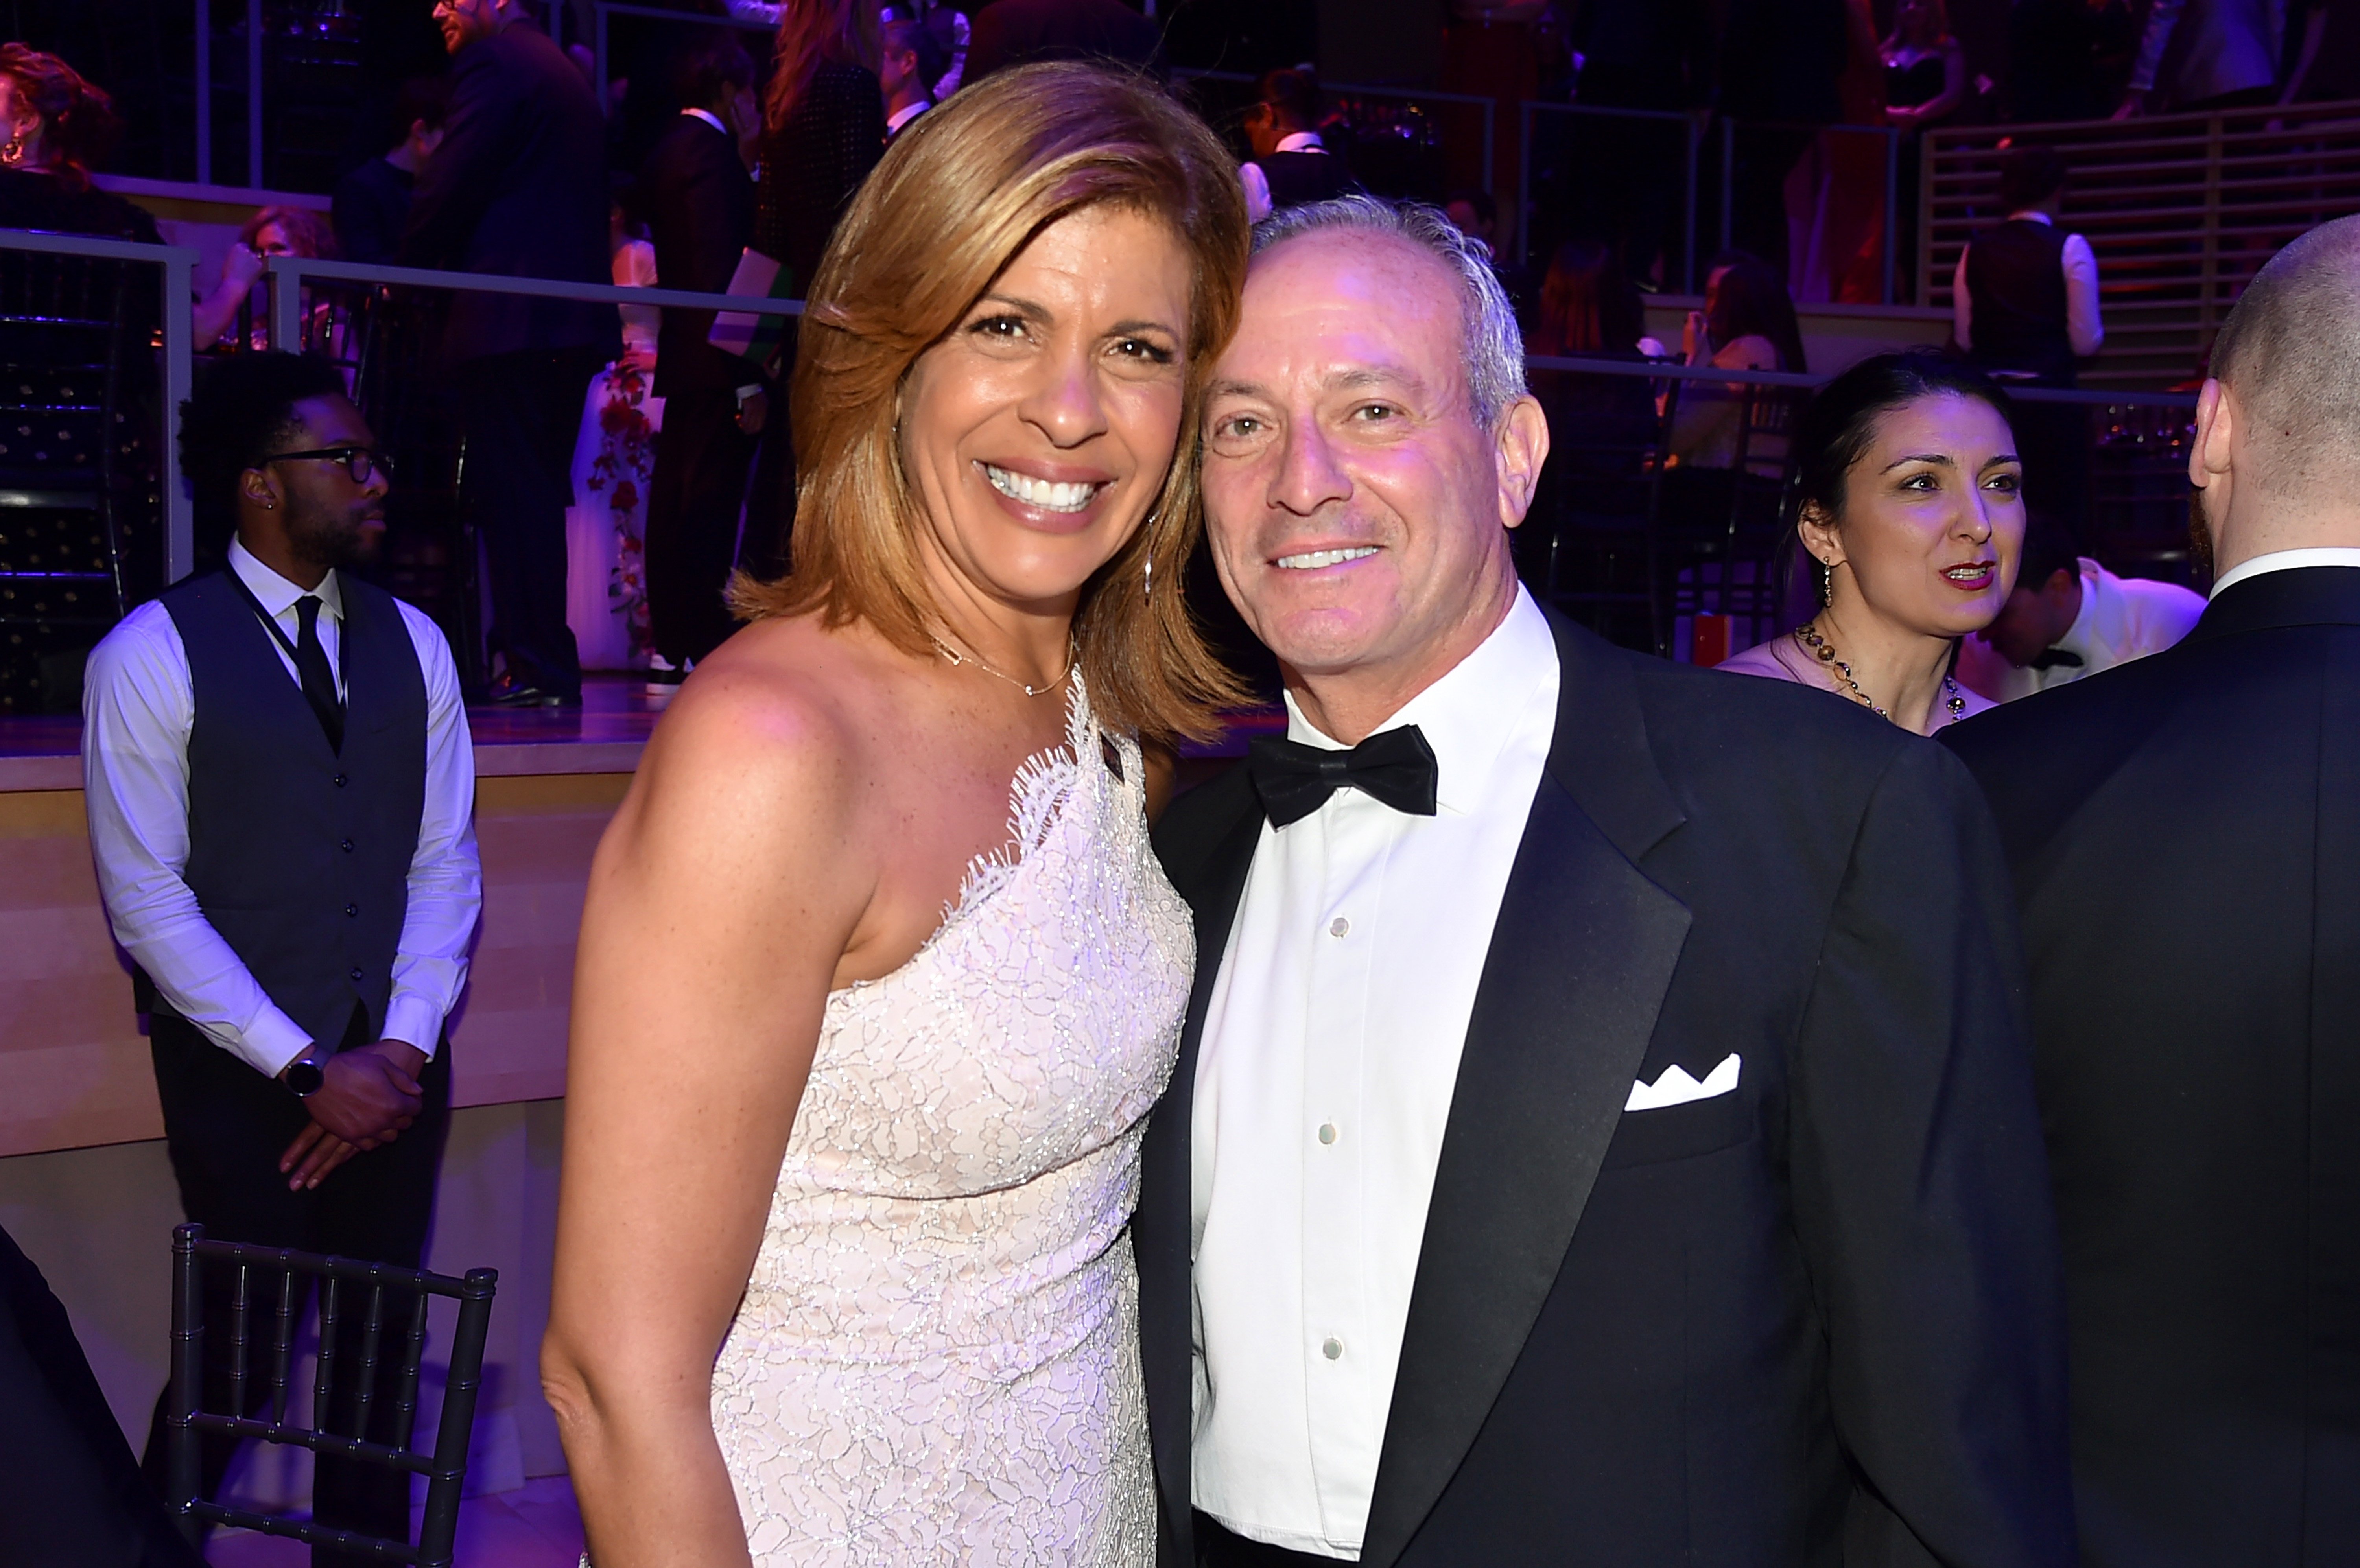  Hoda Kotb and Joel Schiffman at the 2018 TIME 100 Gala at Jazz at Lincoln Center on April 24, 2018 in New York City. | Source: Getty Images